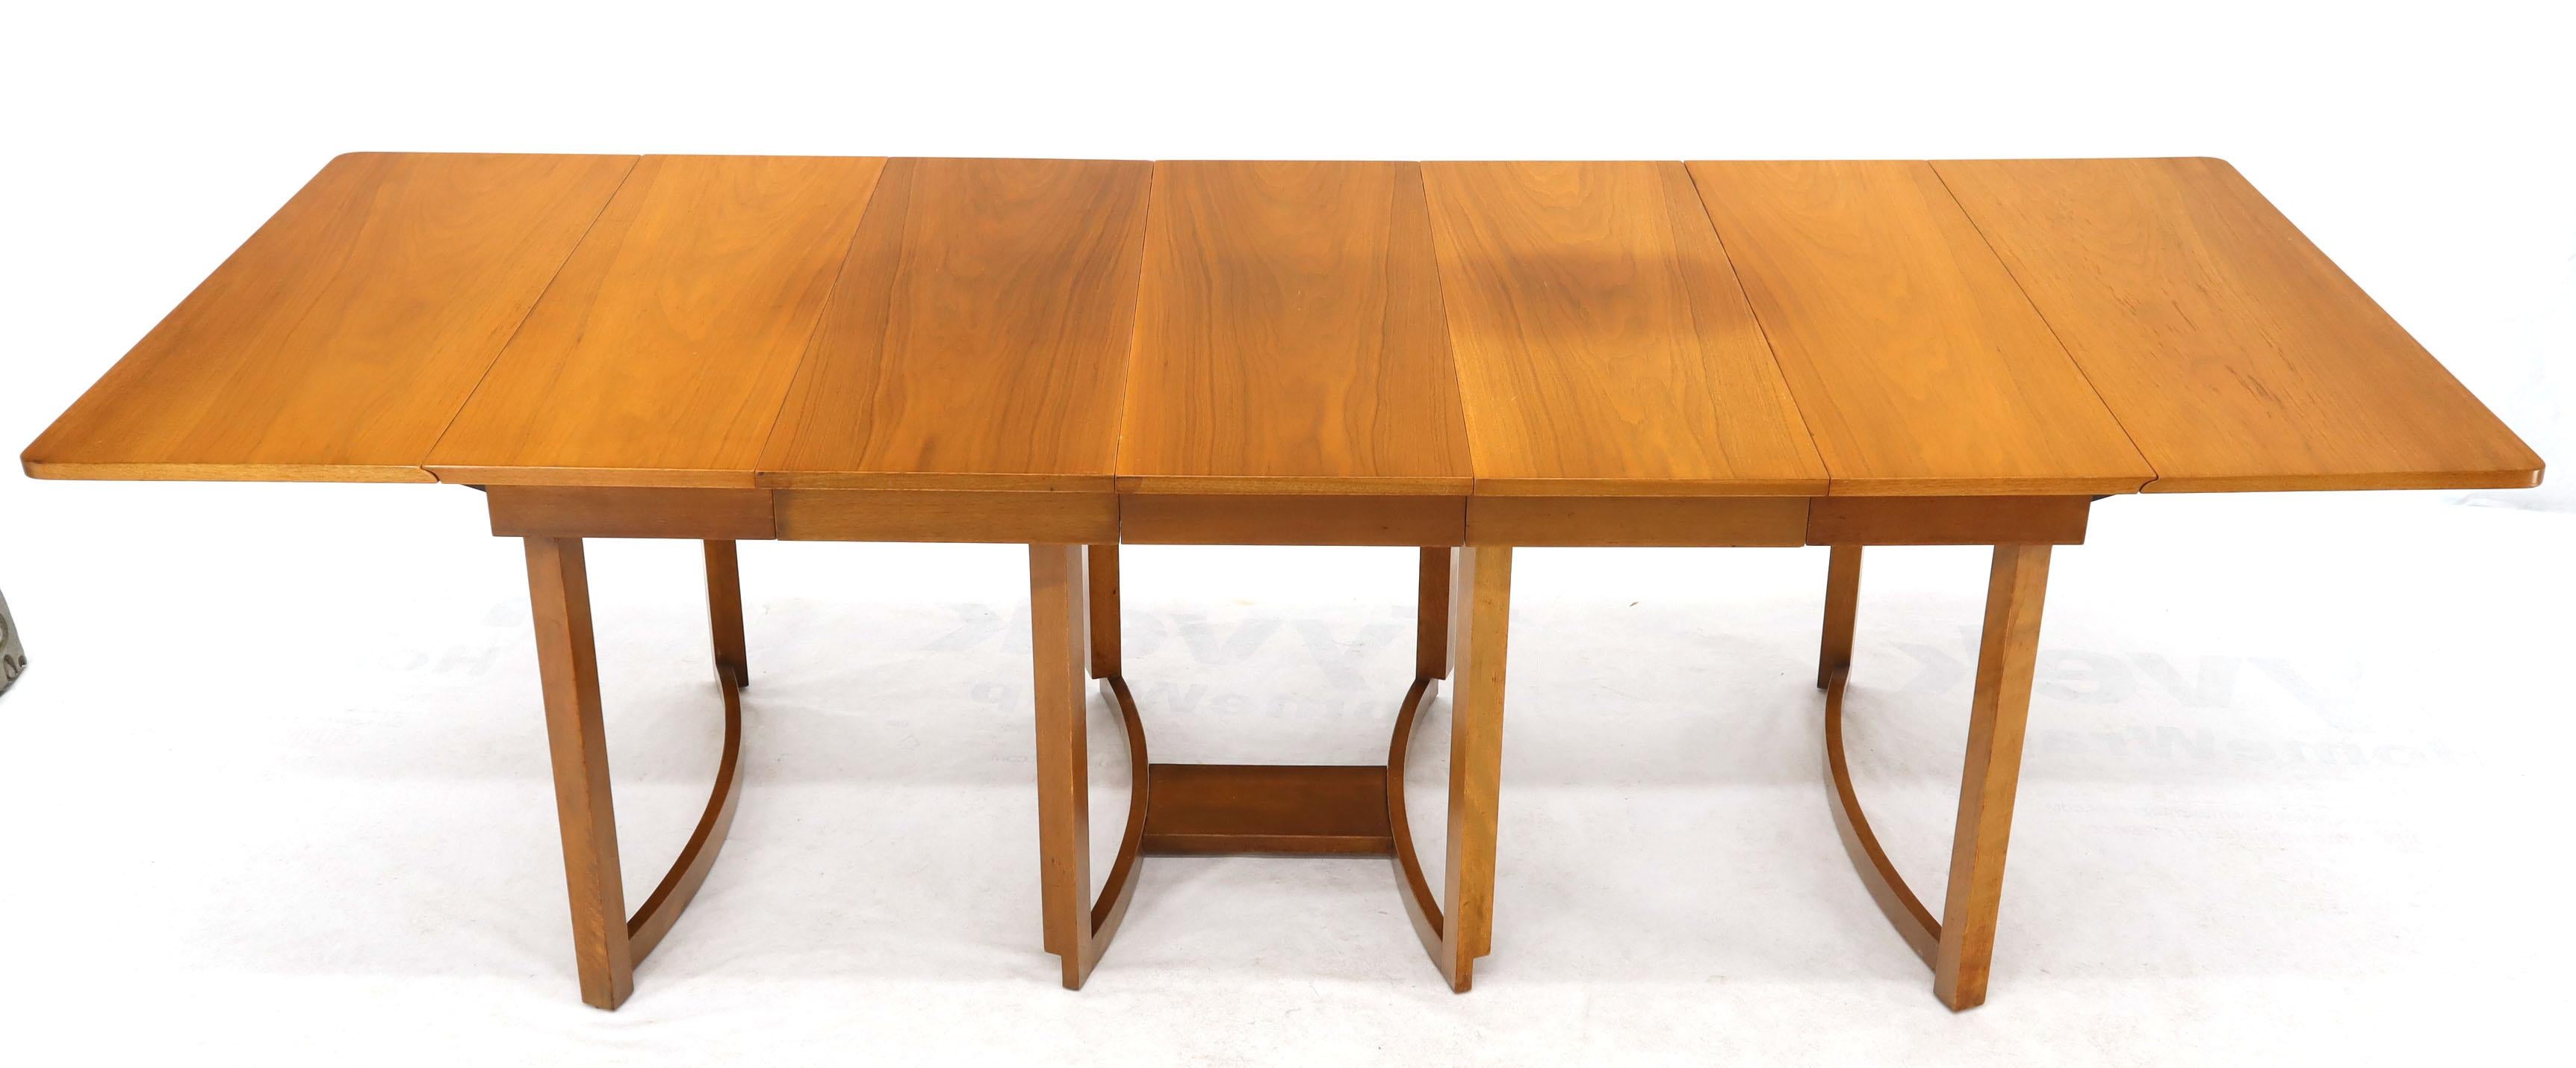 Midcentury Light Walnut Drop Leaf Expandable Dining Table, Three Leafs Boards For Sale 6